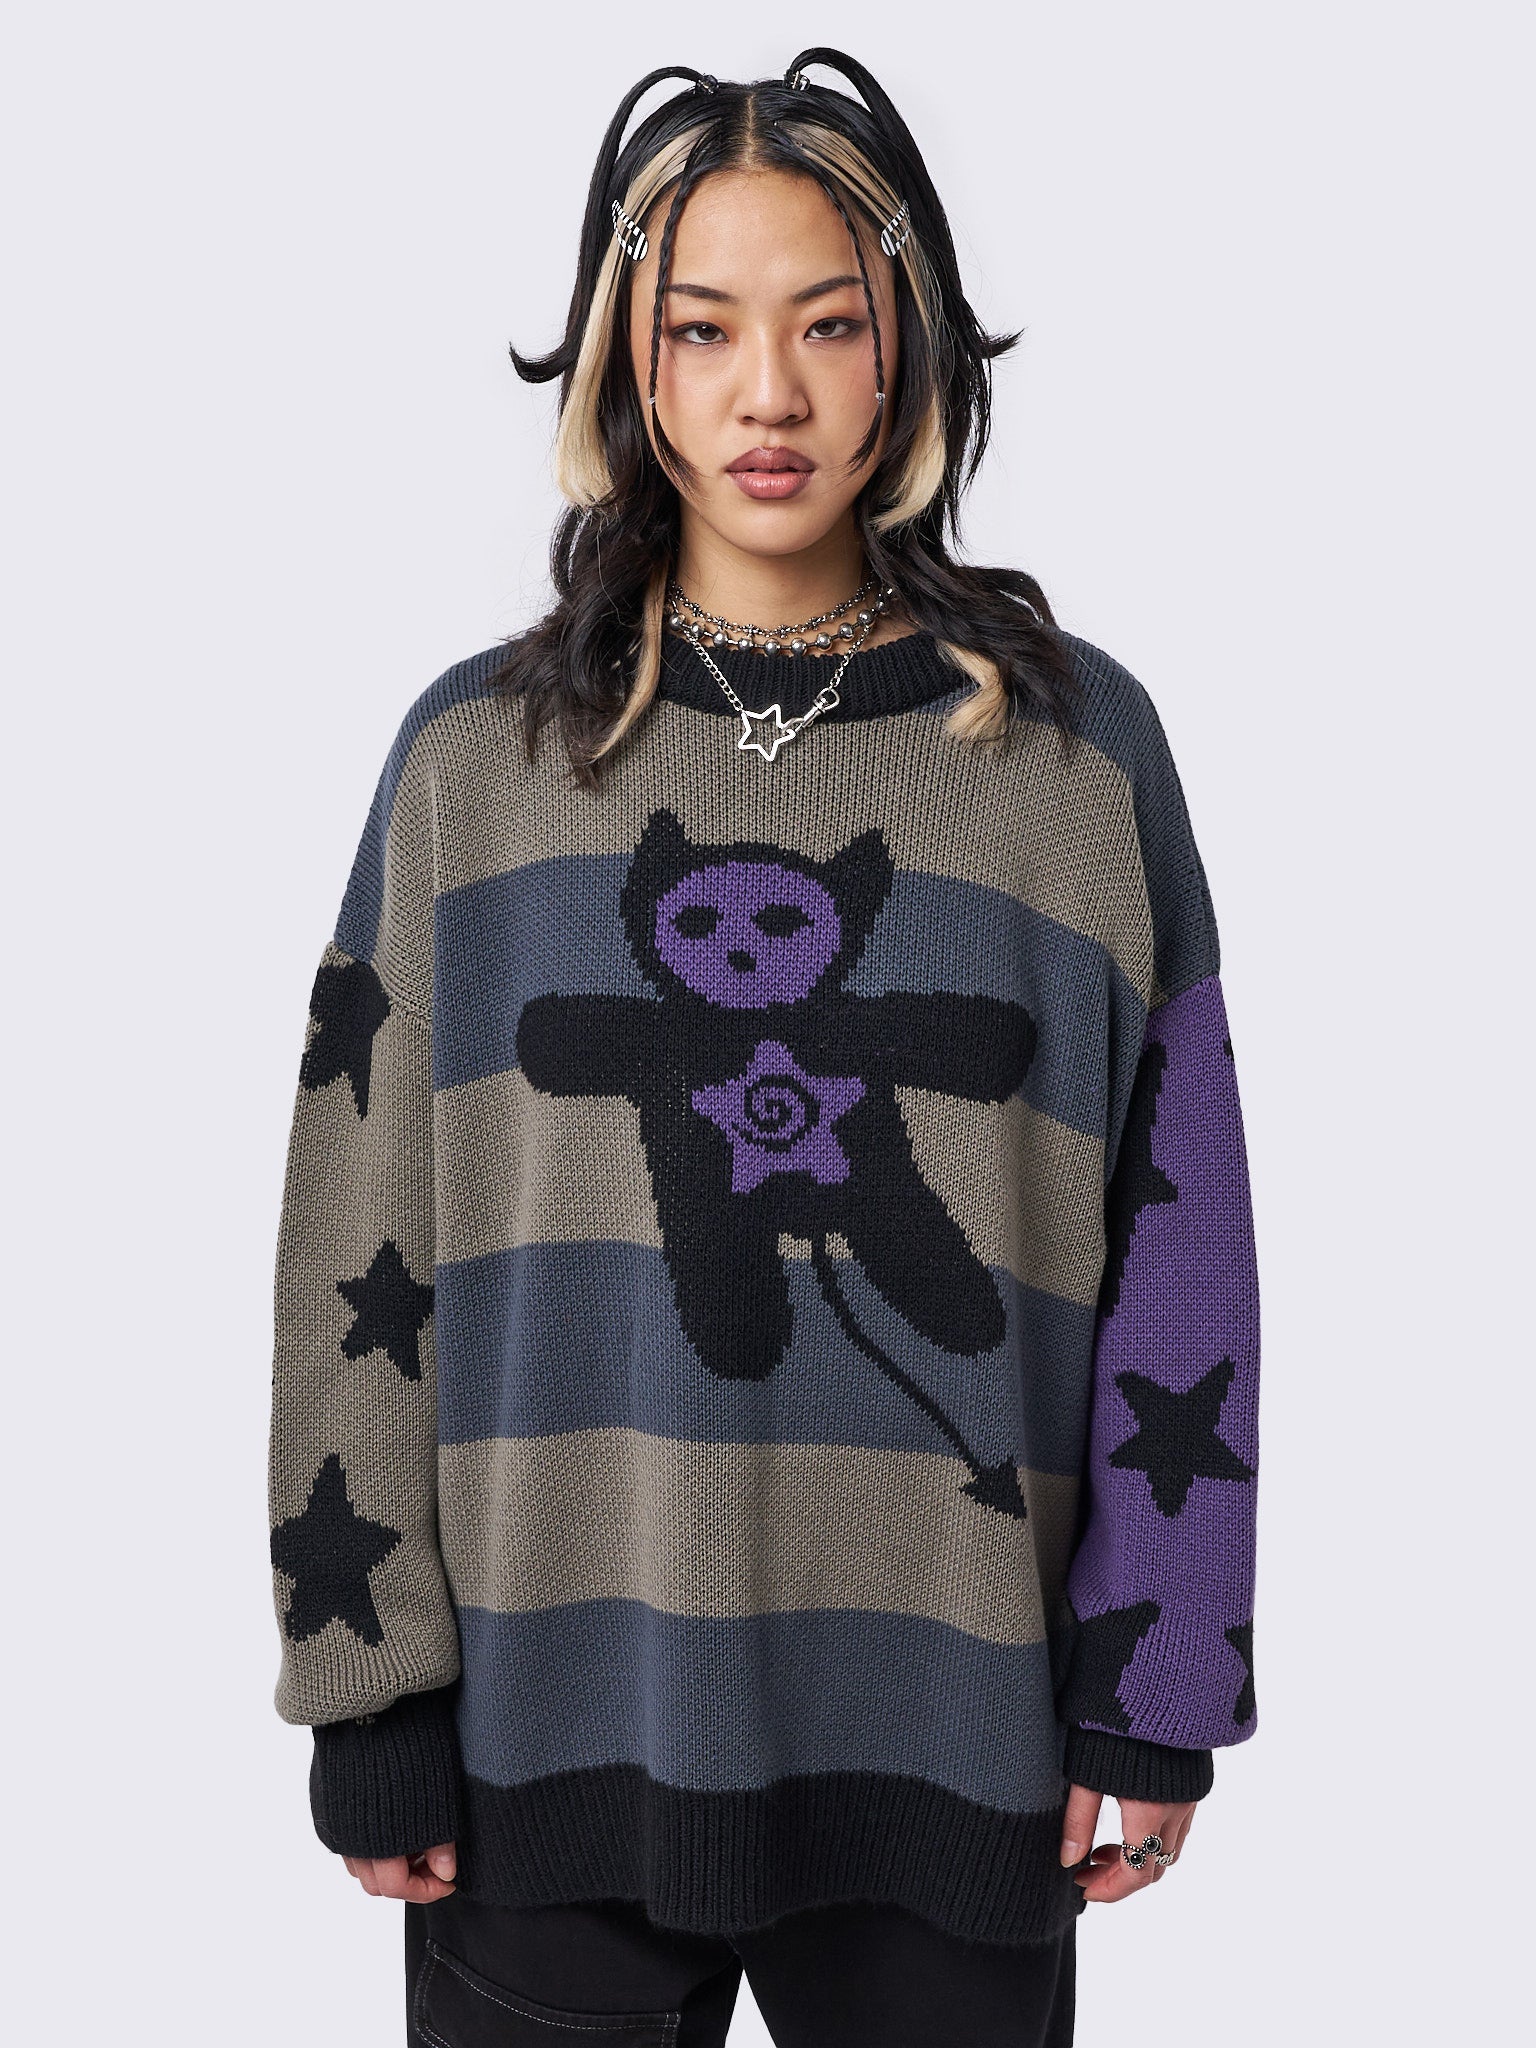 Oversized Swirl Graphic Knit Sweater - Futuristic Style with